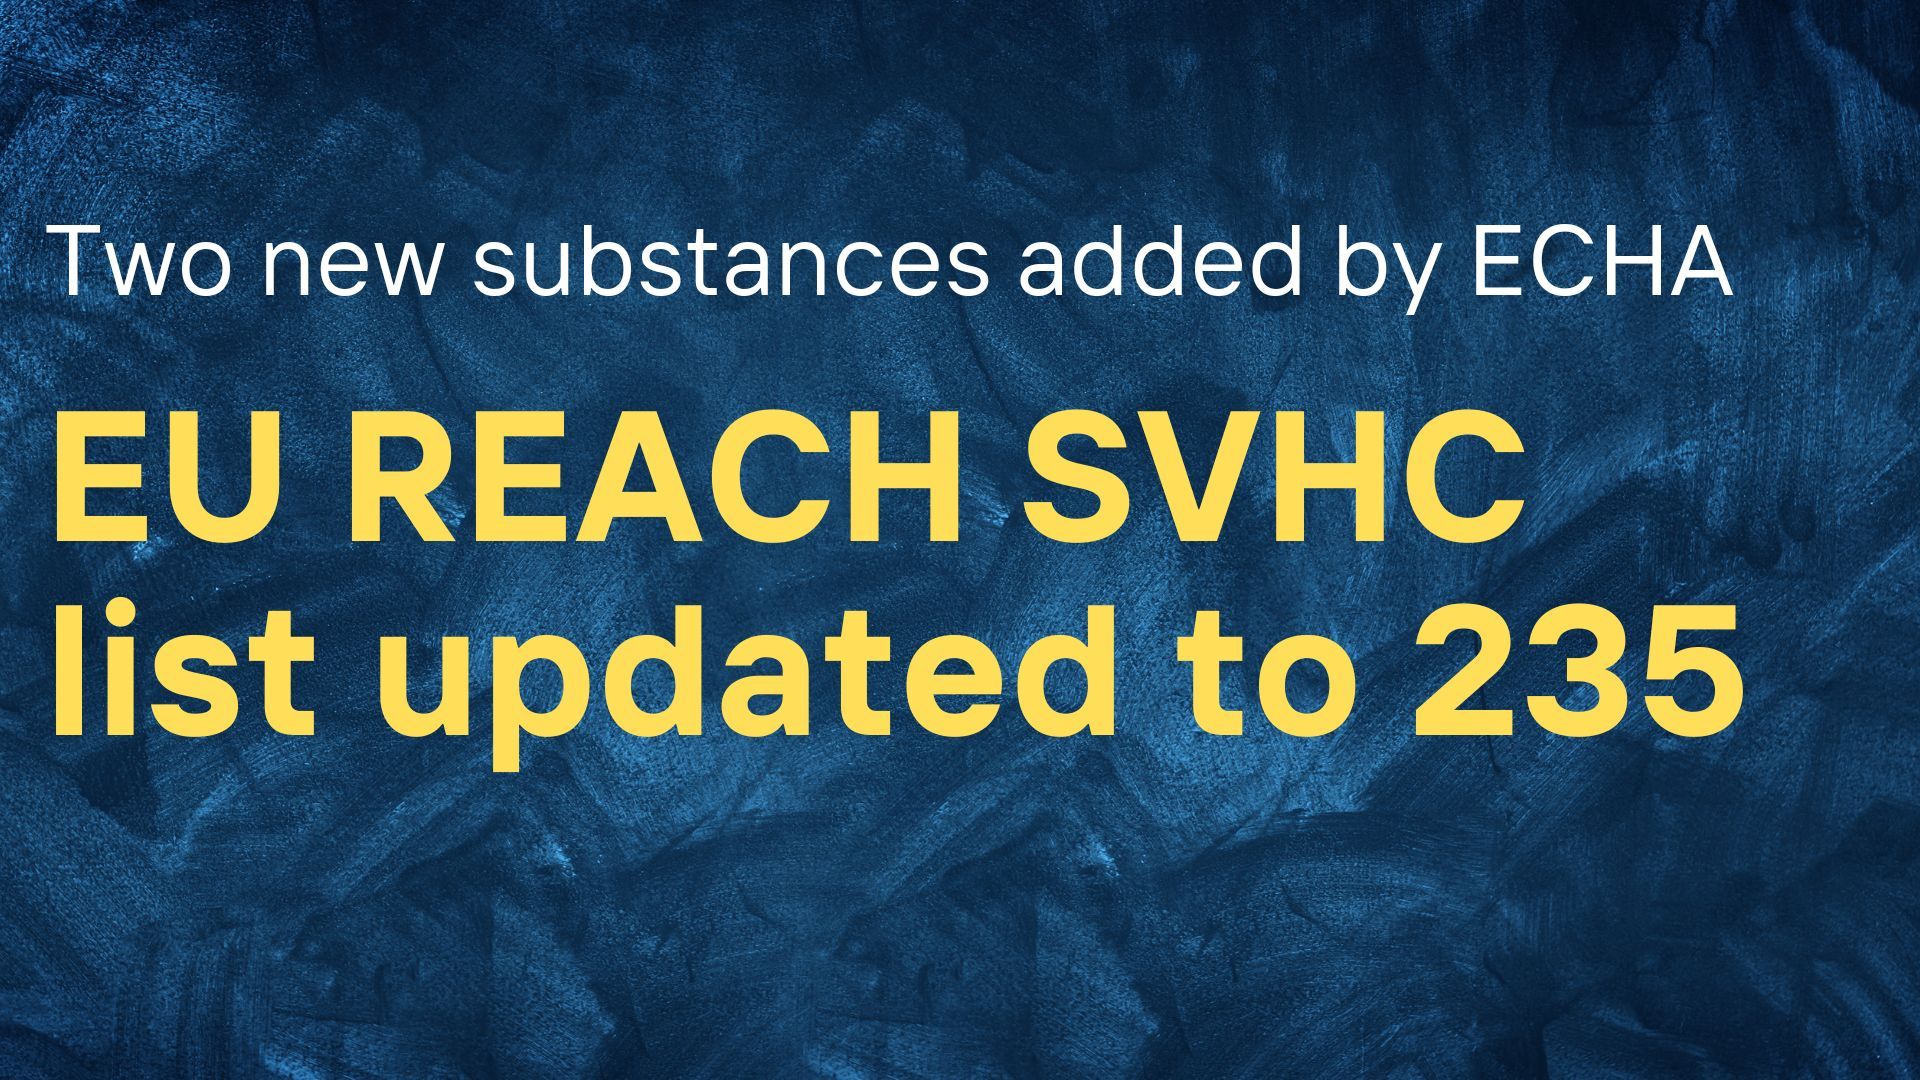 EU REACH SVHC list updated to 235: Two new substances added by ECHA